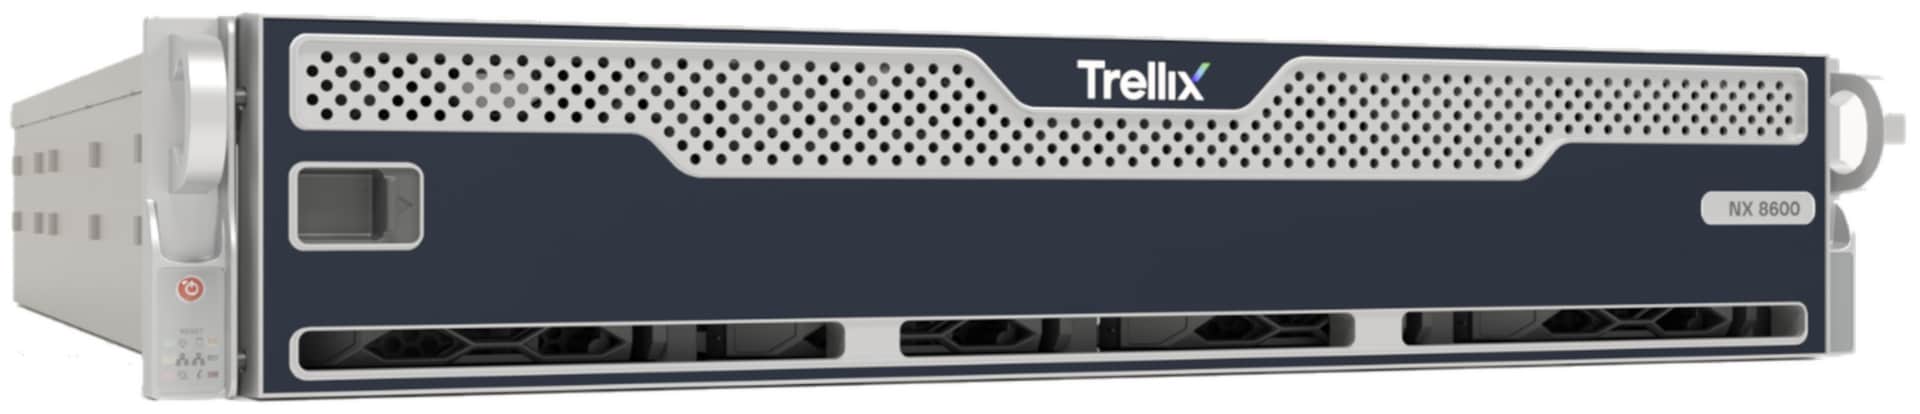 Trellix NX 8600 Network Security Appliance